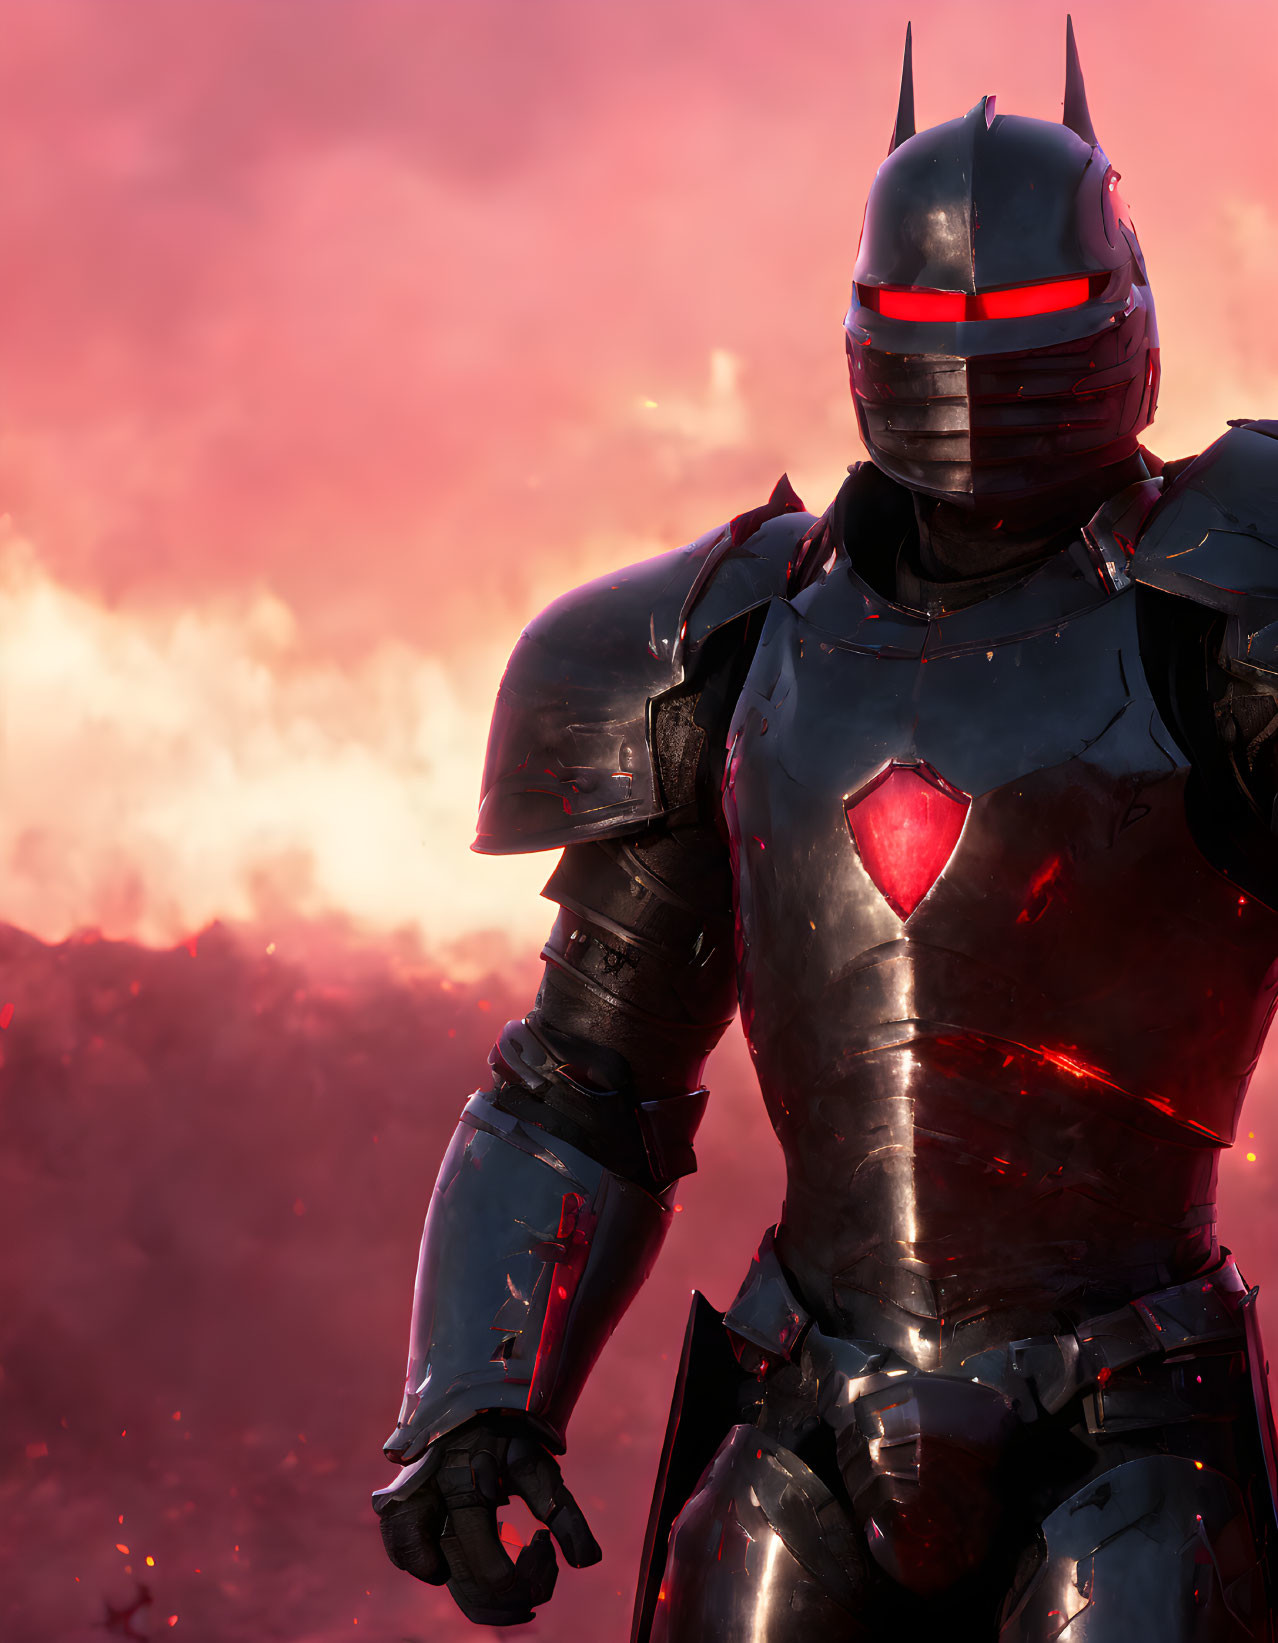 Futuristic knight in armor under pink sky with glowing red visor